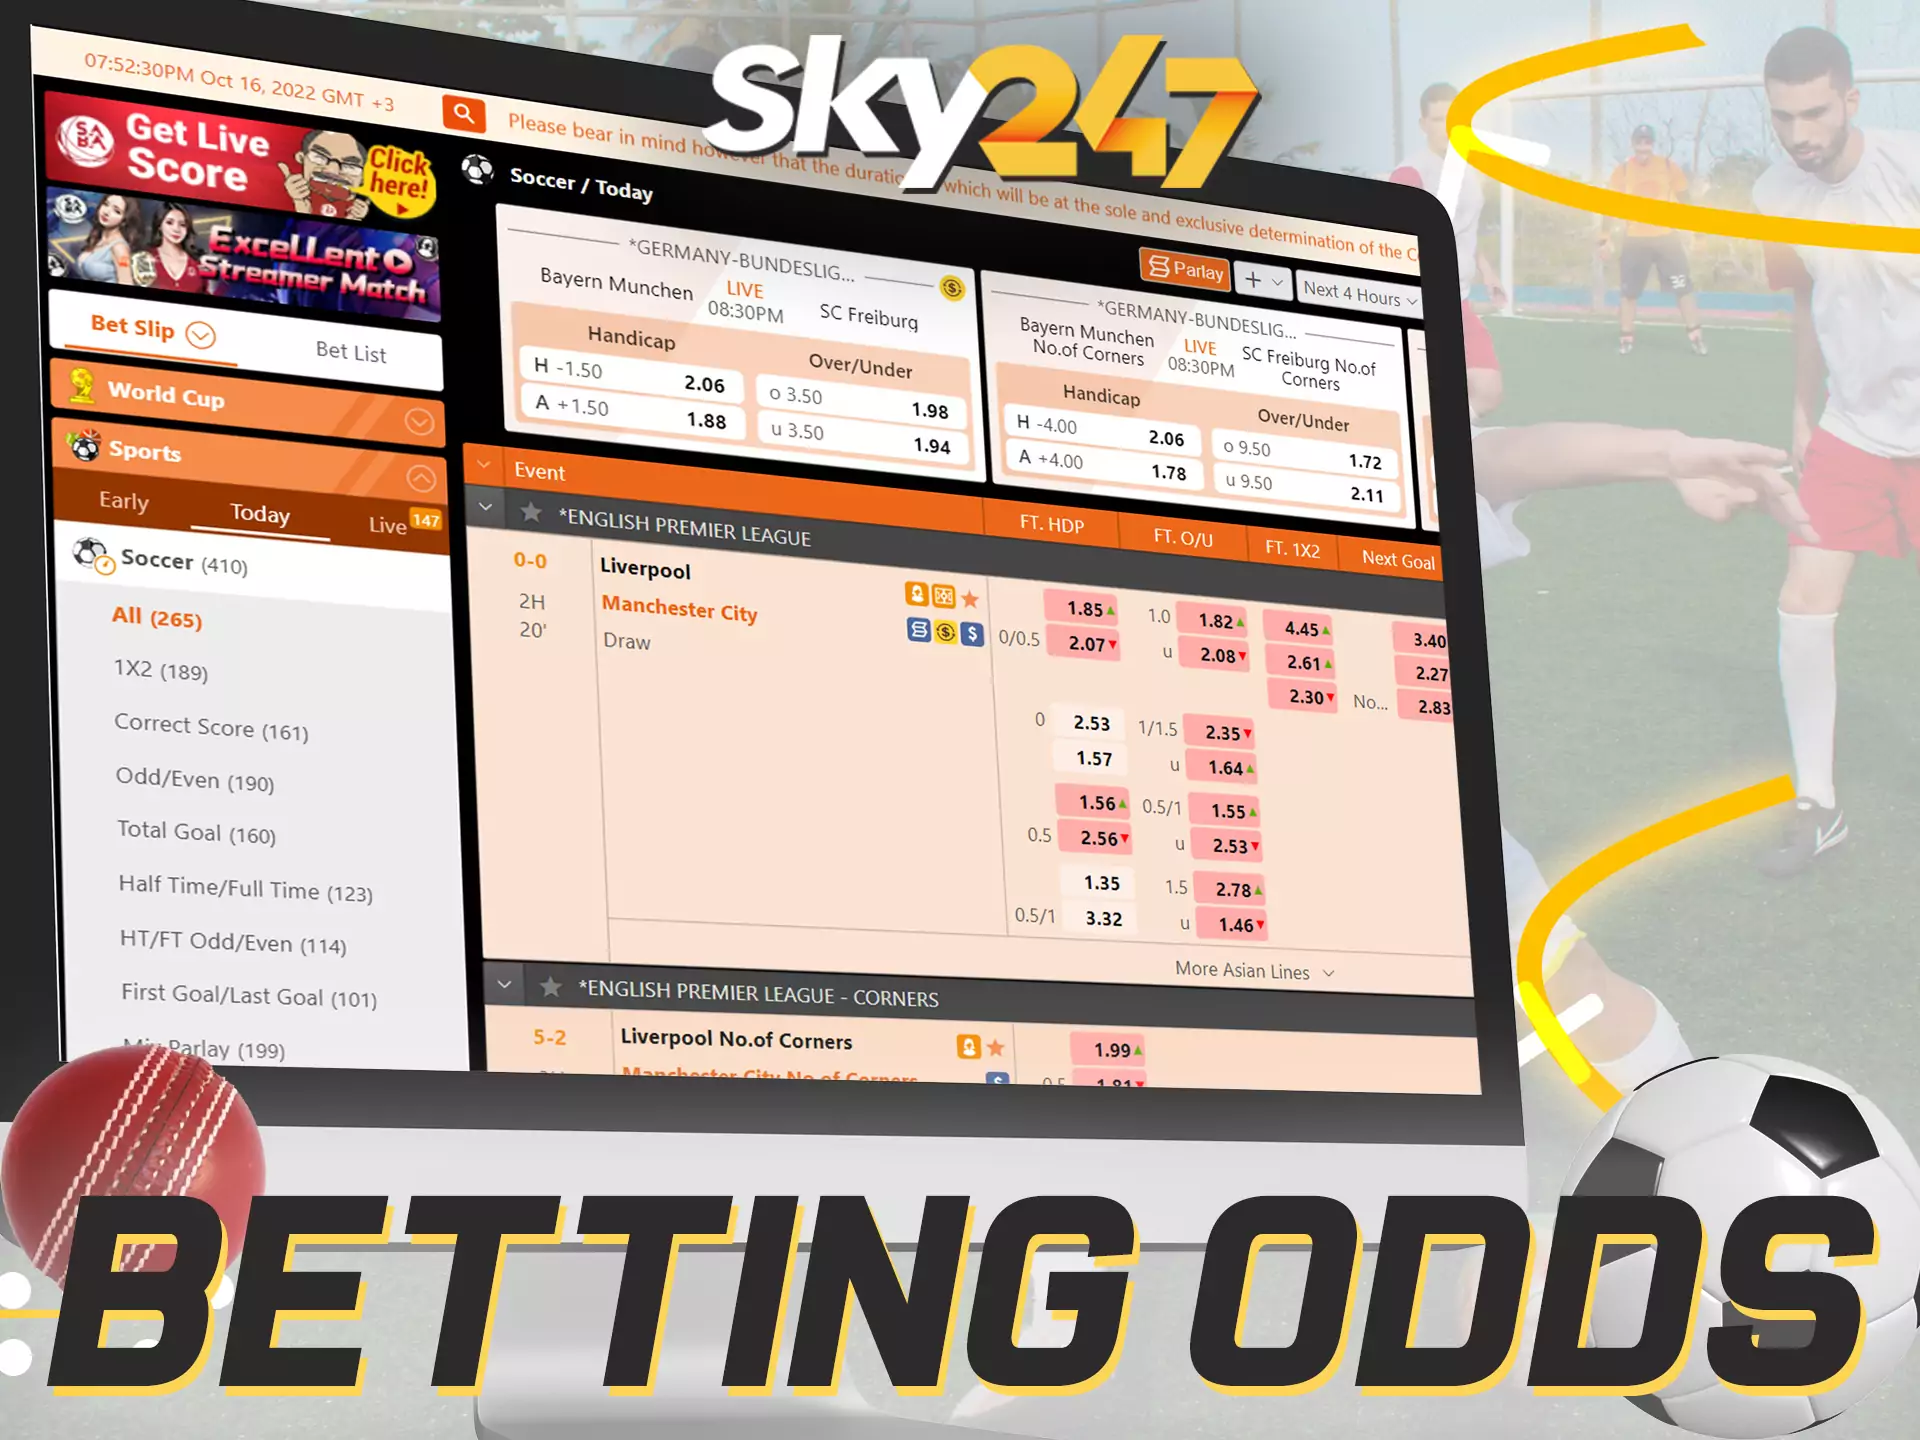 On the Sky247 website, you find great odds for betting on sports.